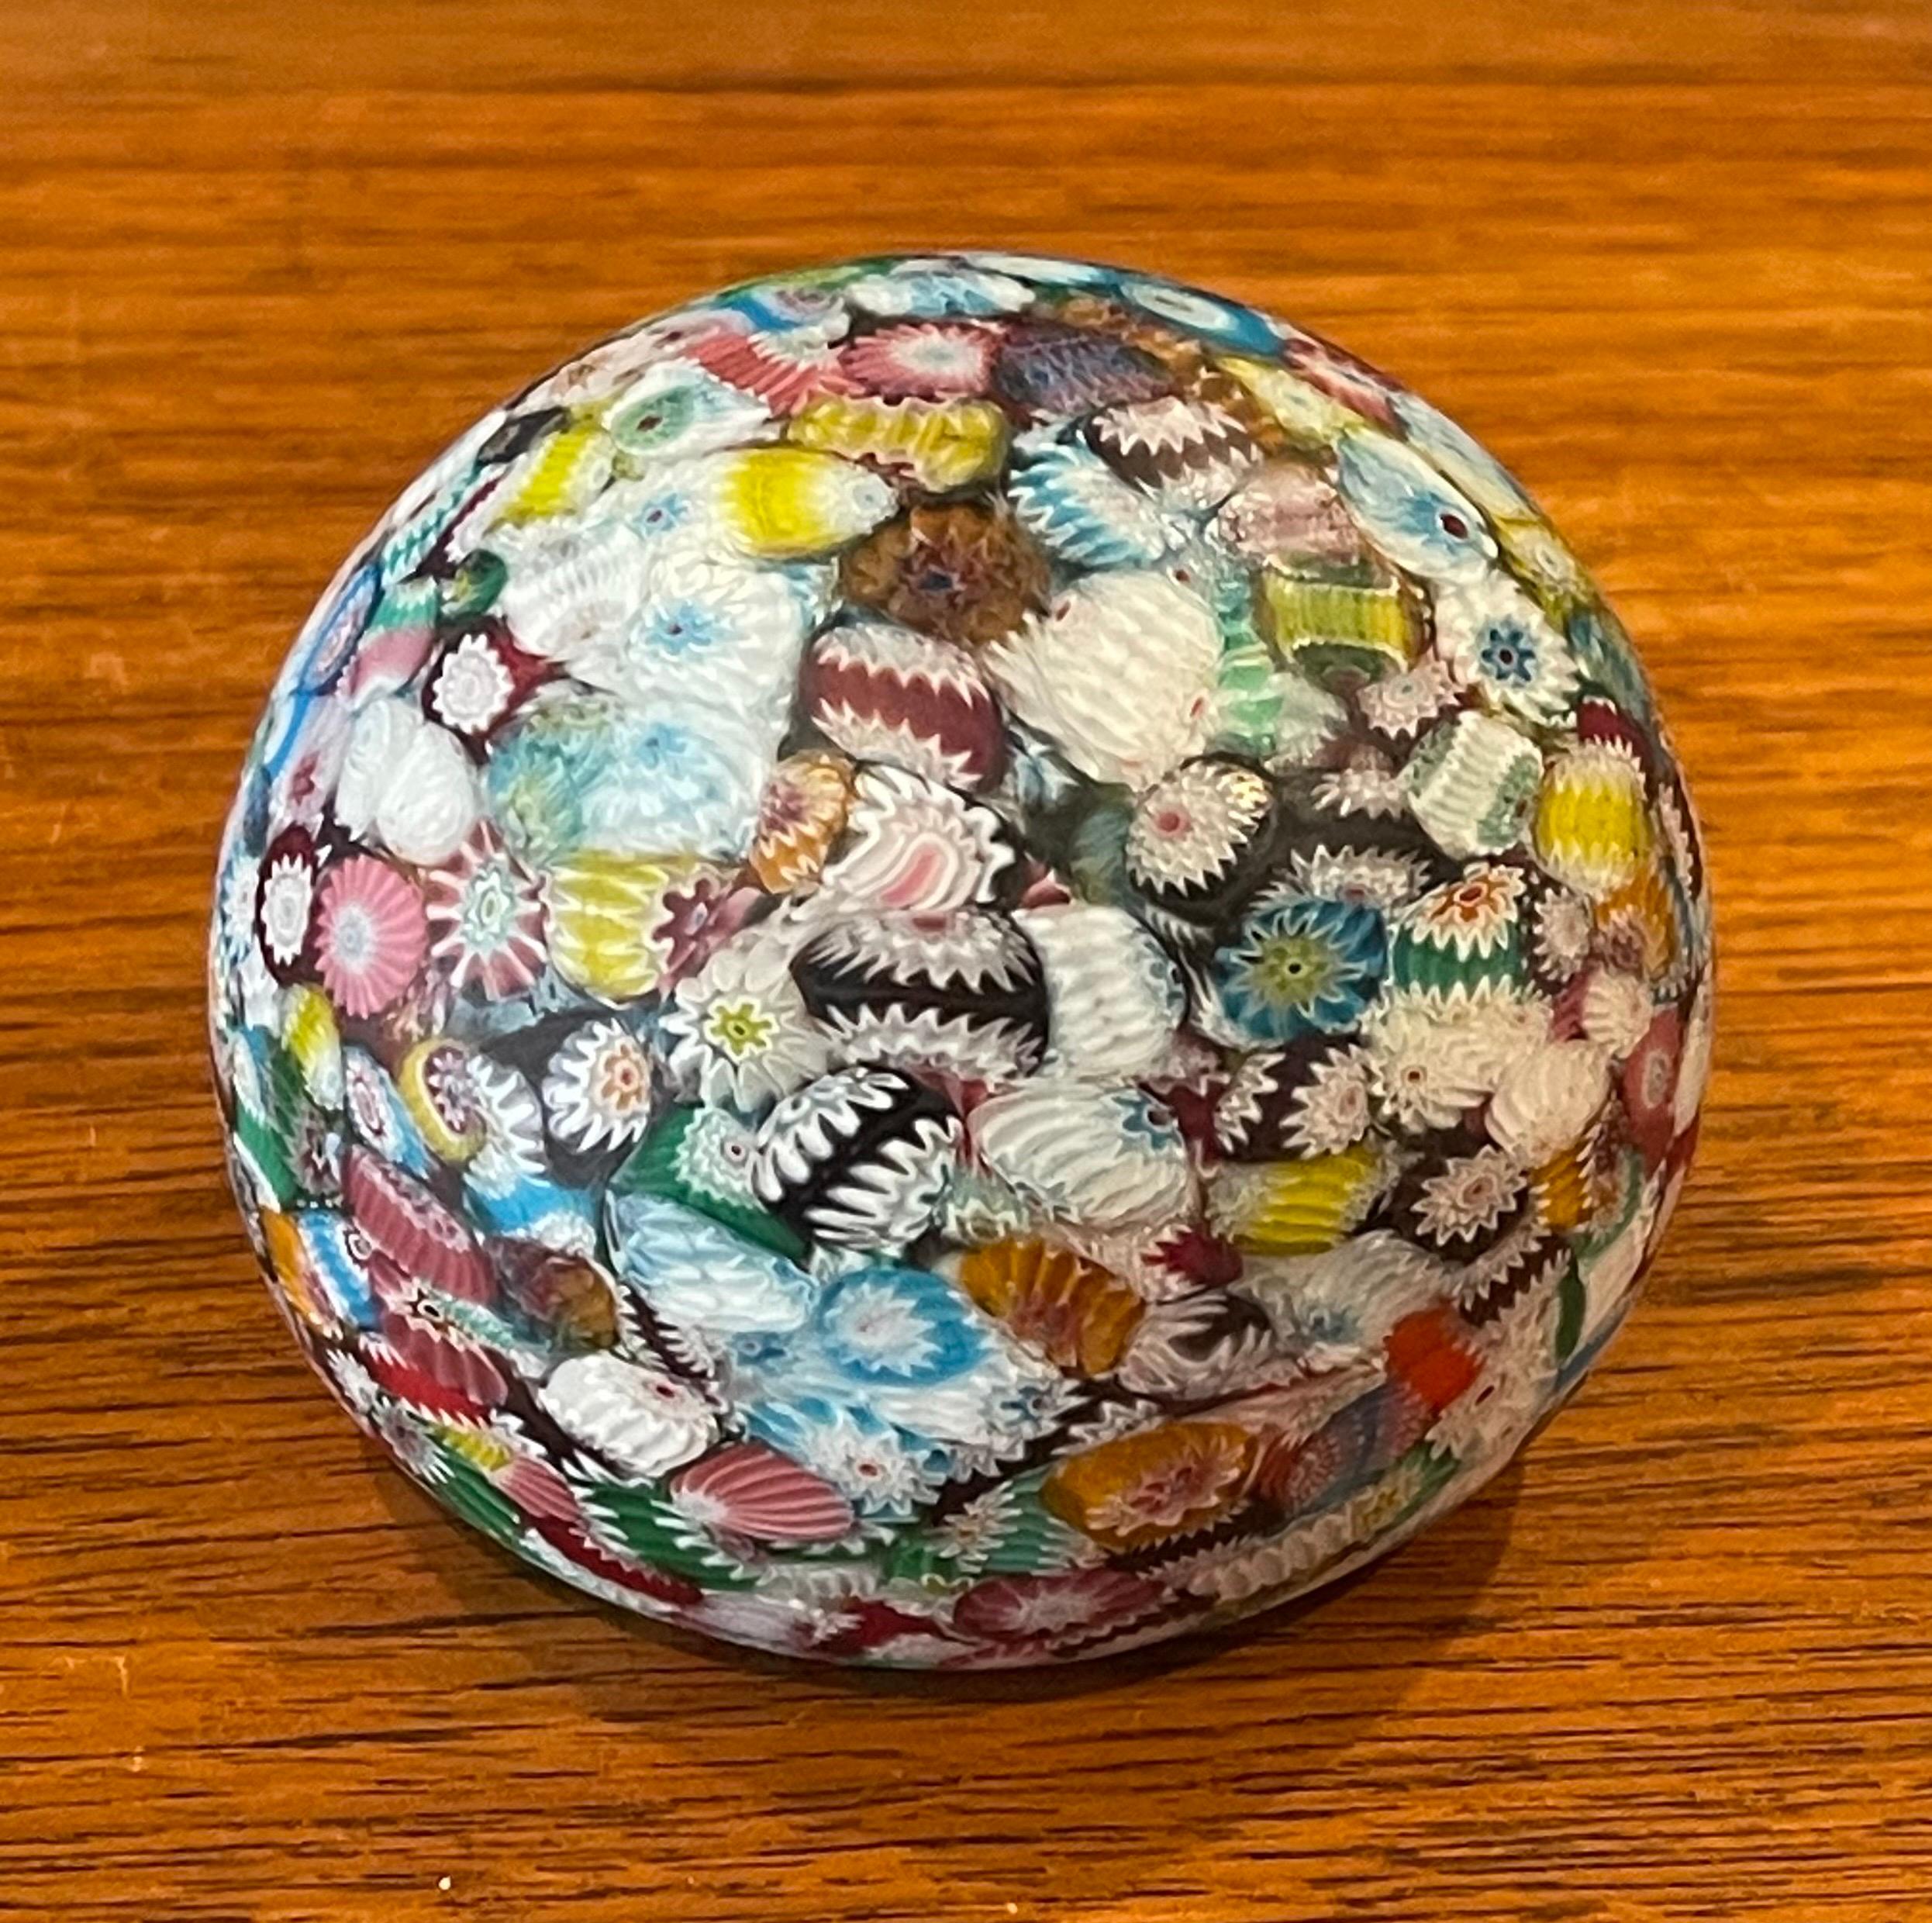 Small colorful art glass paperweight by Millefiori of Italy, circa 1980s. The piece is in very good condition with no chips or scratches and measures 3.25